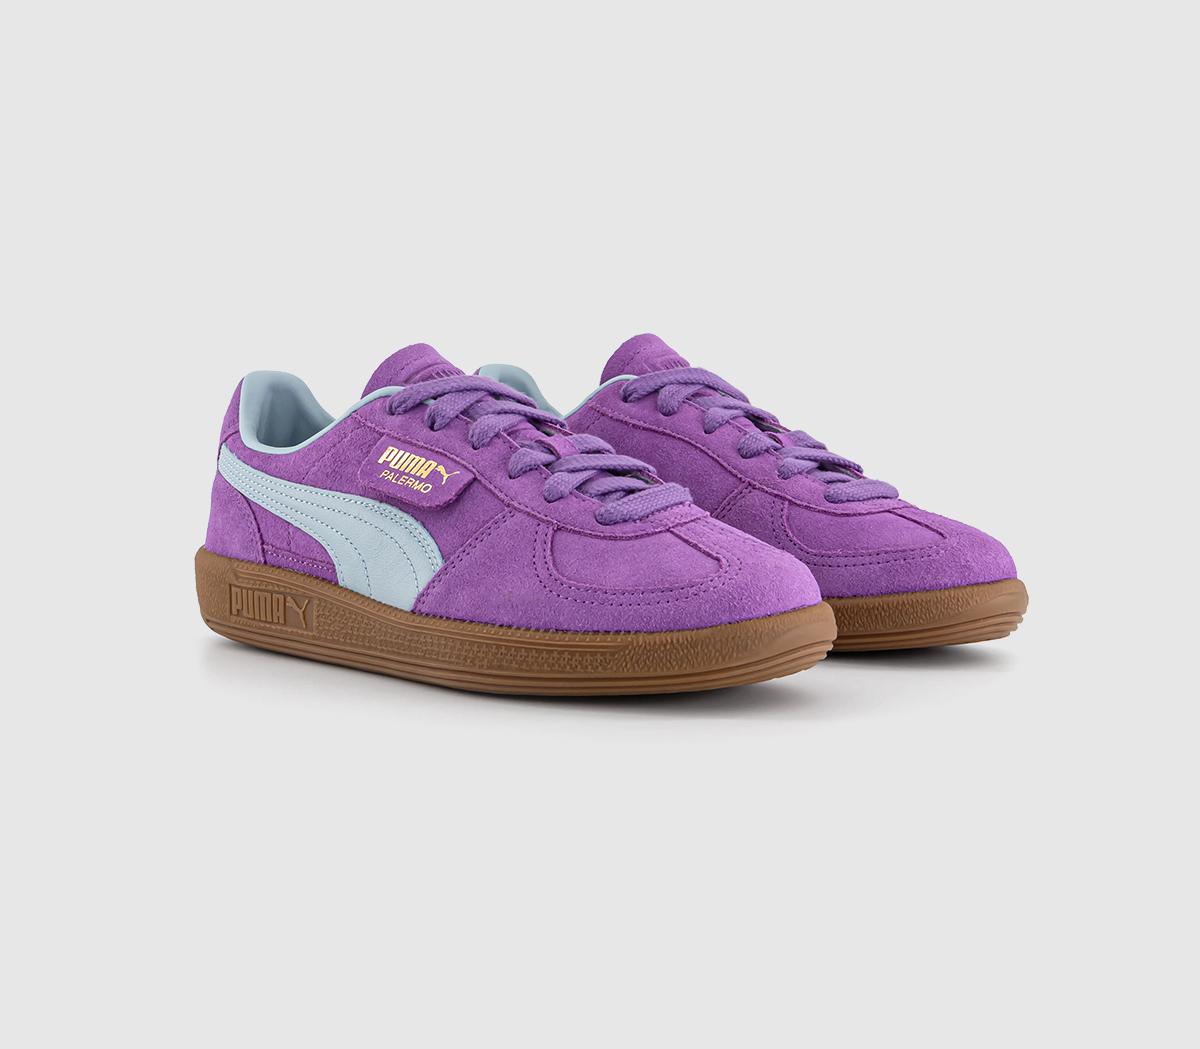 Puma Womens Palermo Trainers Ultraviolet Turquoise Surf Gold Purple, 5